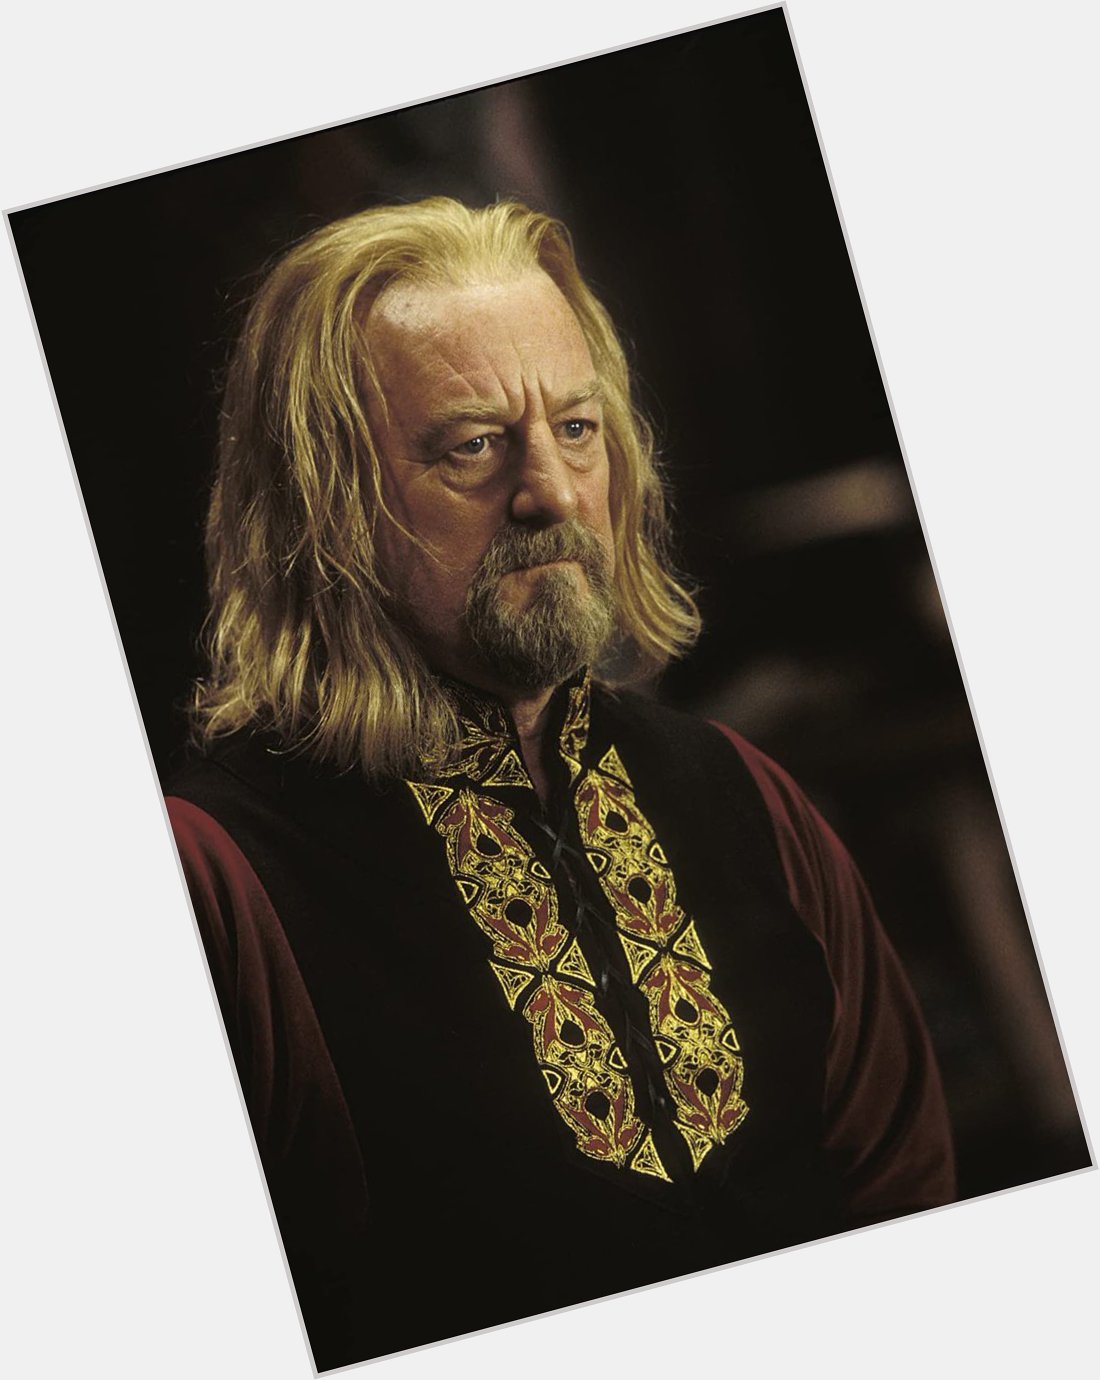 Also Happy 78th Birthday to Theoden himself Bernard Hill! 